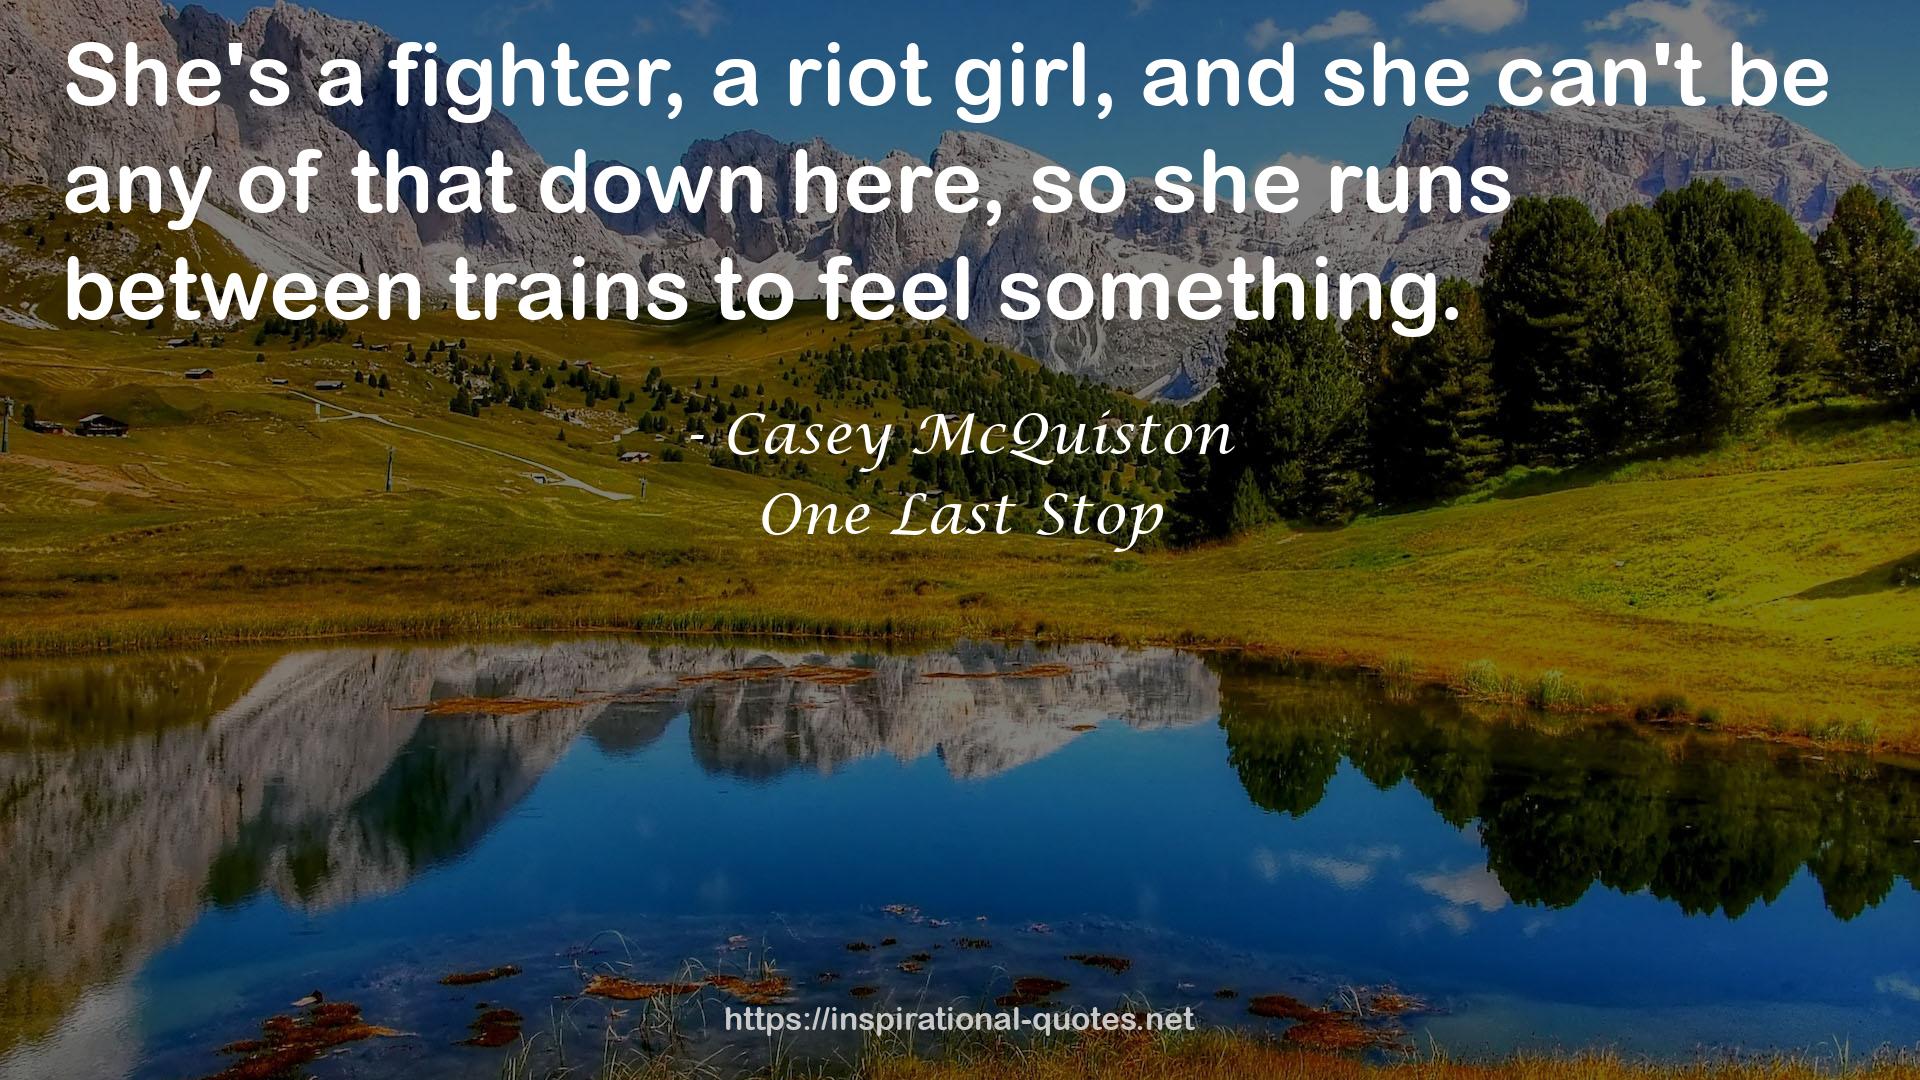 One Last Stop QUOTES